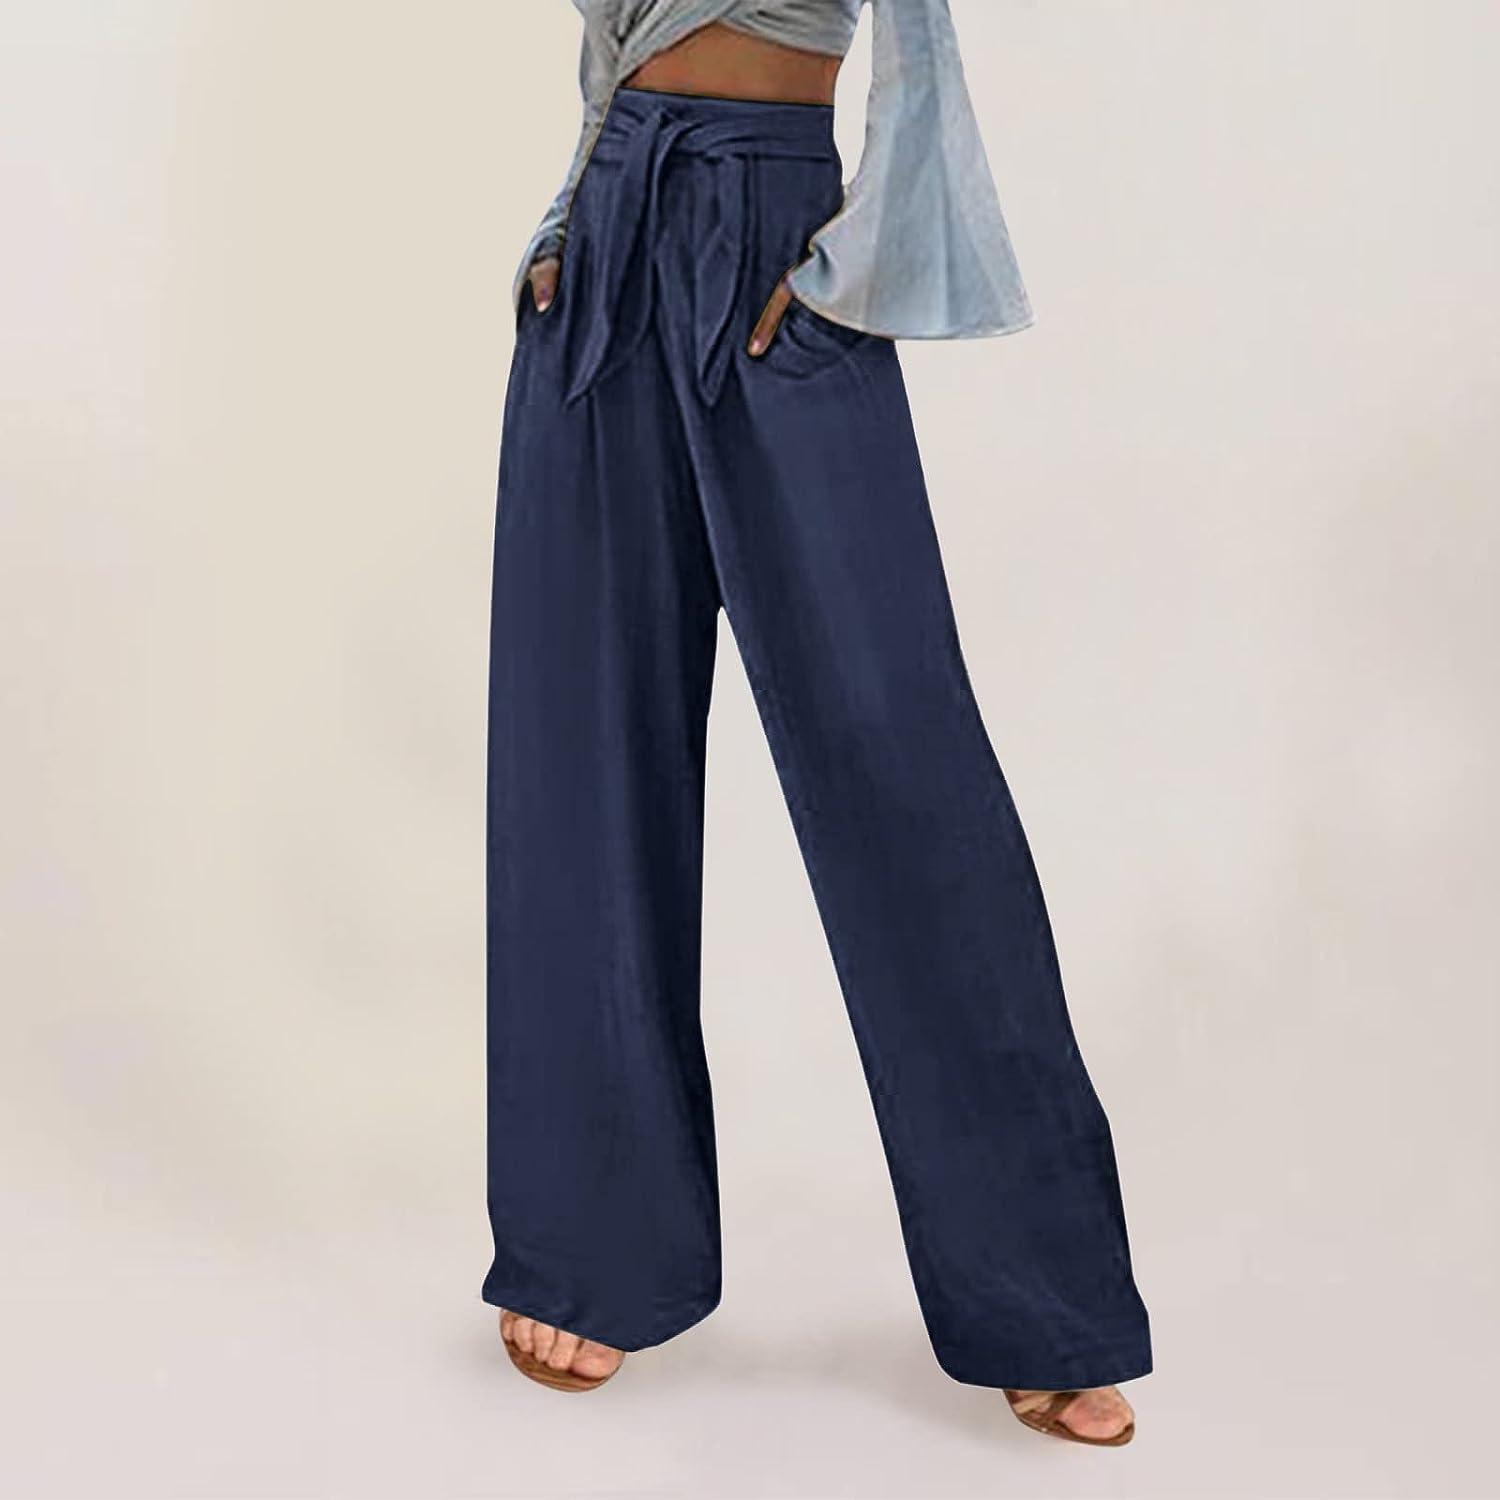 Palazzo Pants for Women Elastic High Waisted Solid Wide Leg Pants Casual  Loose Summer Flowy Beach Lounge Trousers